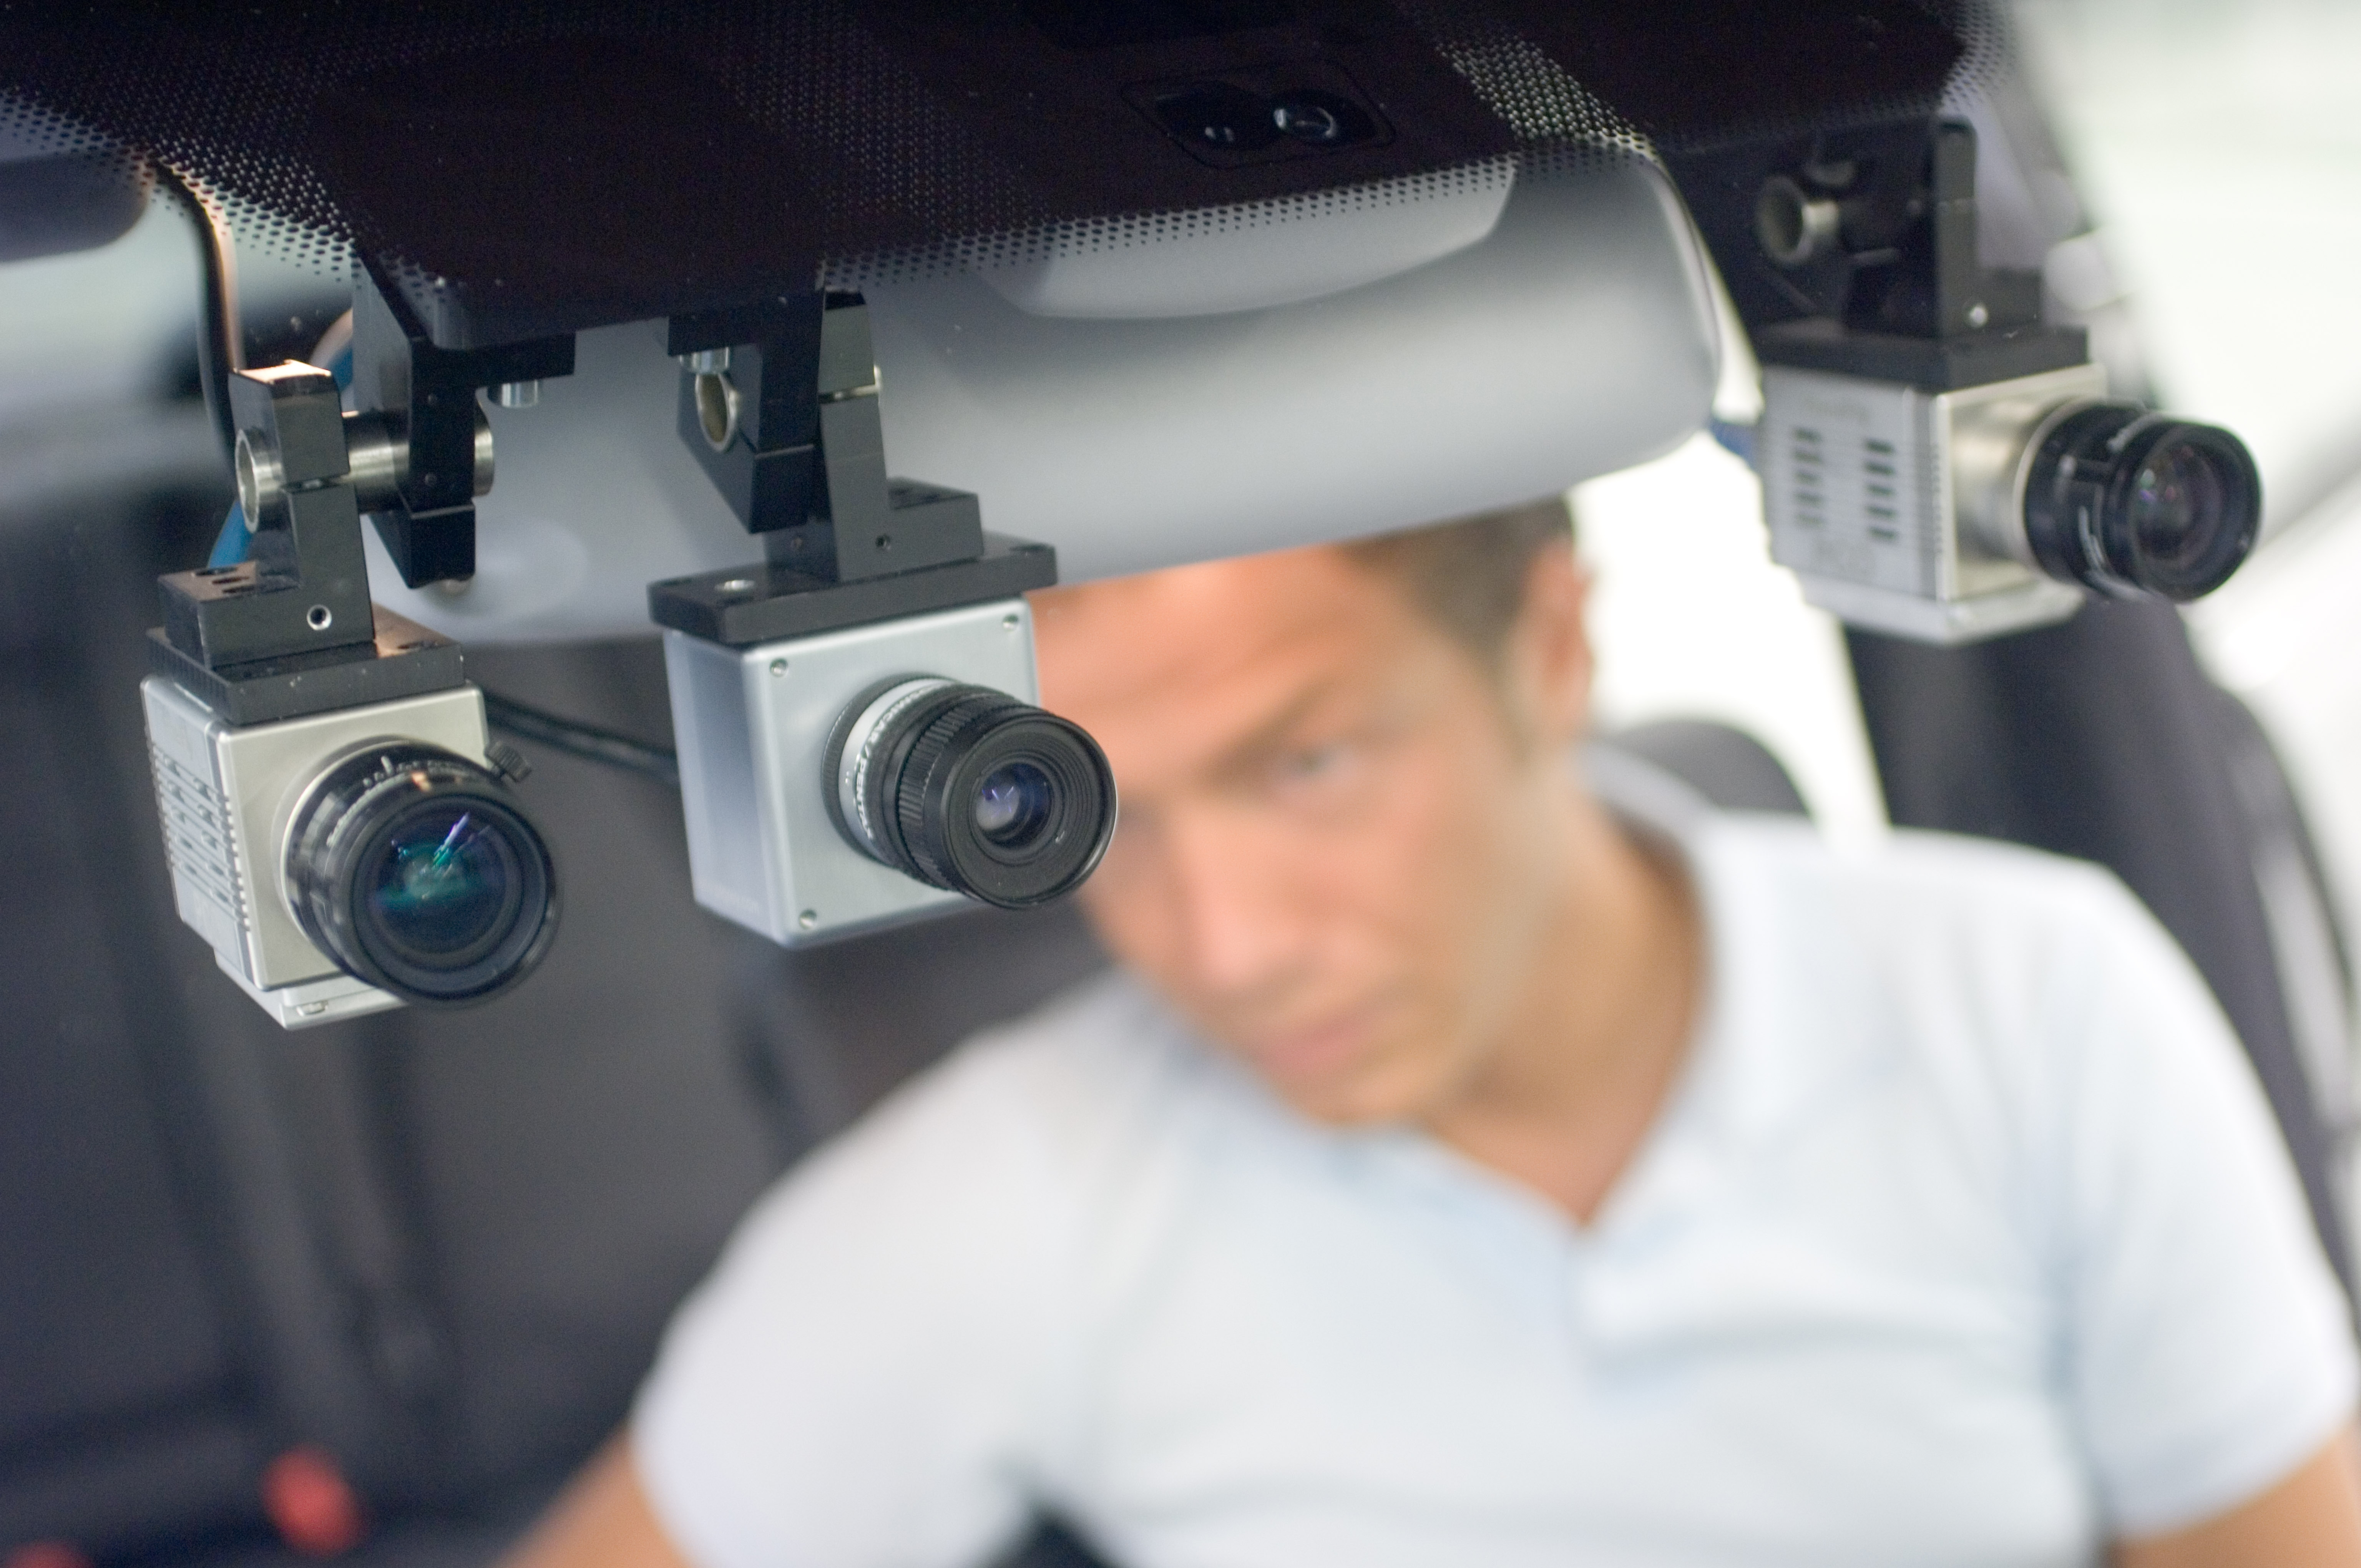 in-vehicle detection cameras 